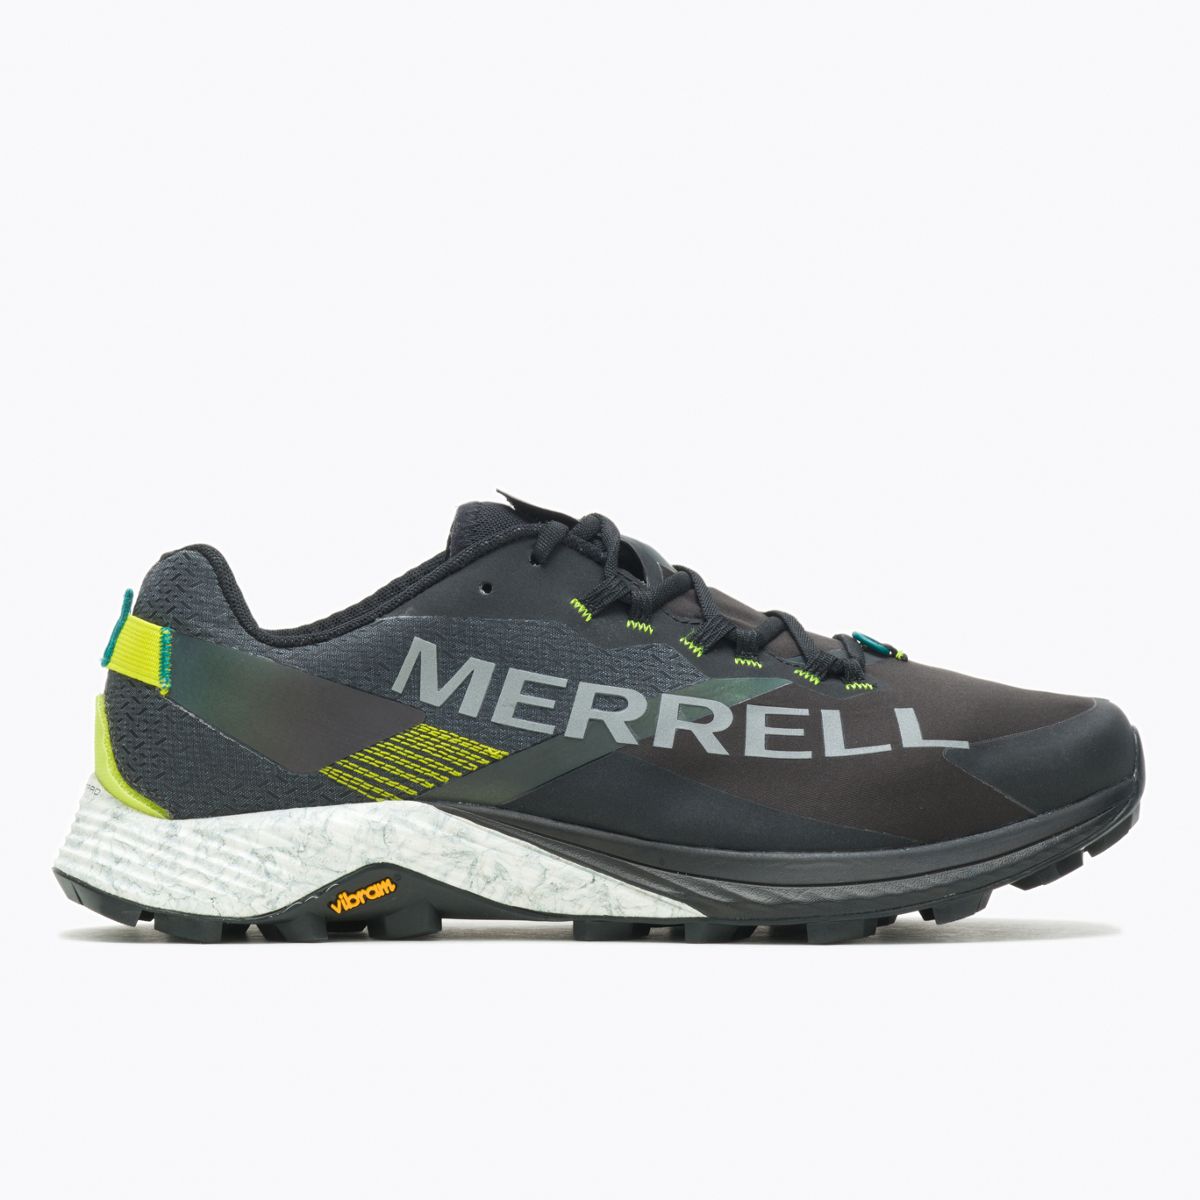 Semi-Annual Sale - save up to 50%! Price as marked. | Merrell